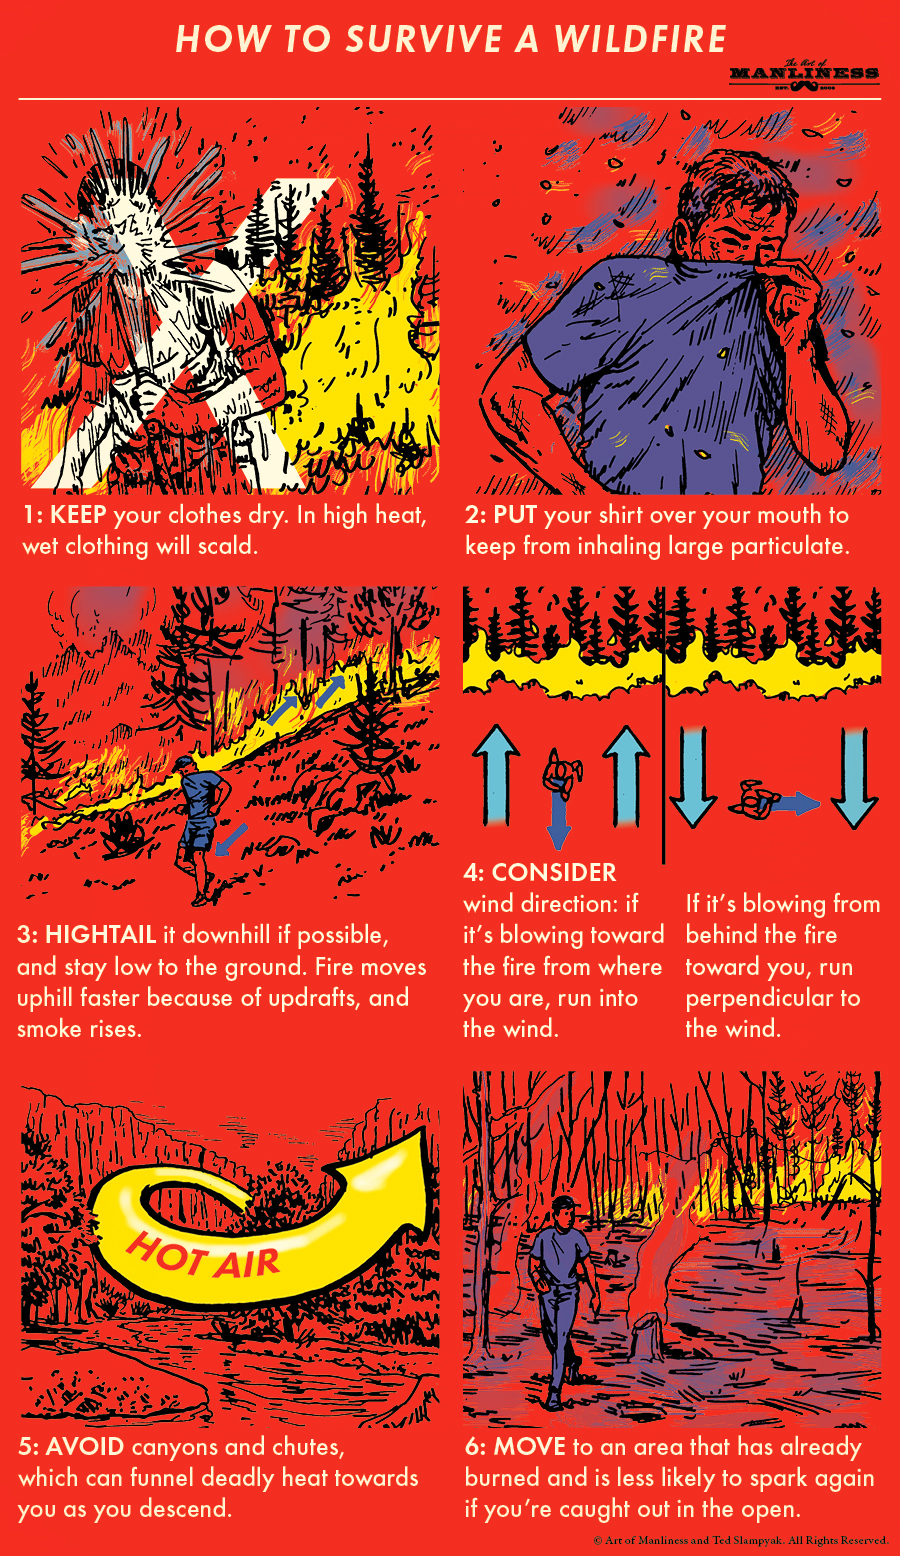 Steps about surviving a wildfire.